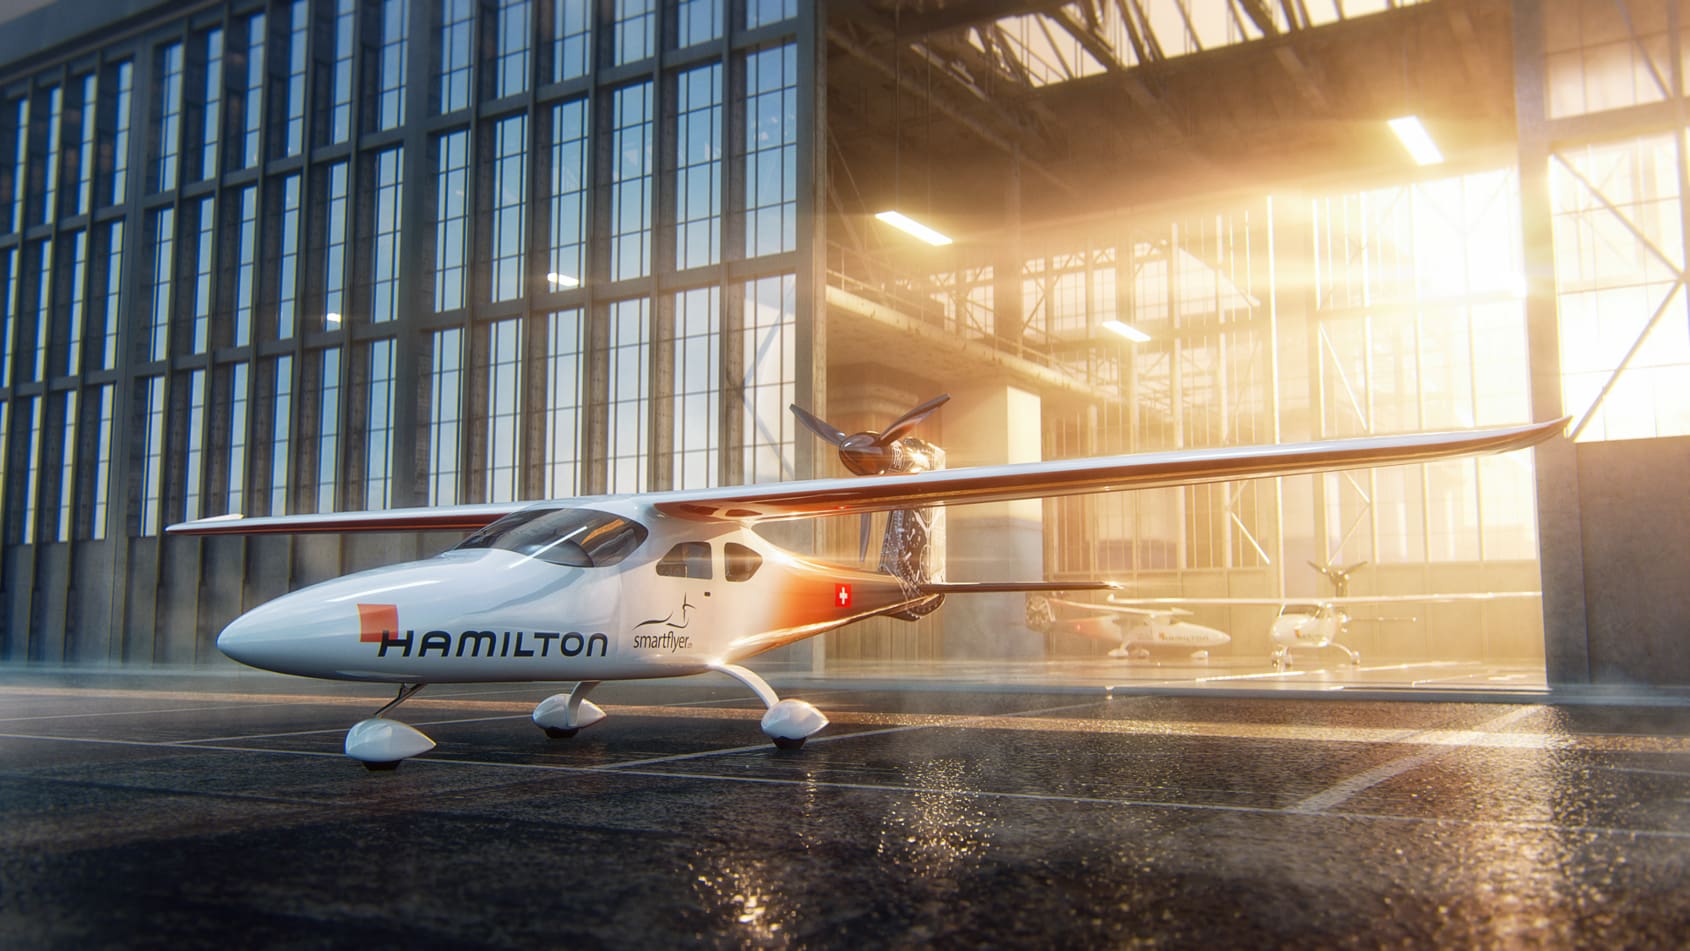 Hamilton partners with the hybrid-electric Smartflyer that aims to change the face of air travel